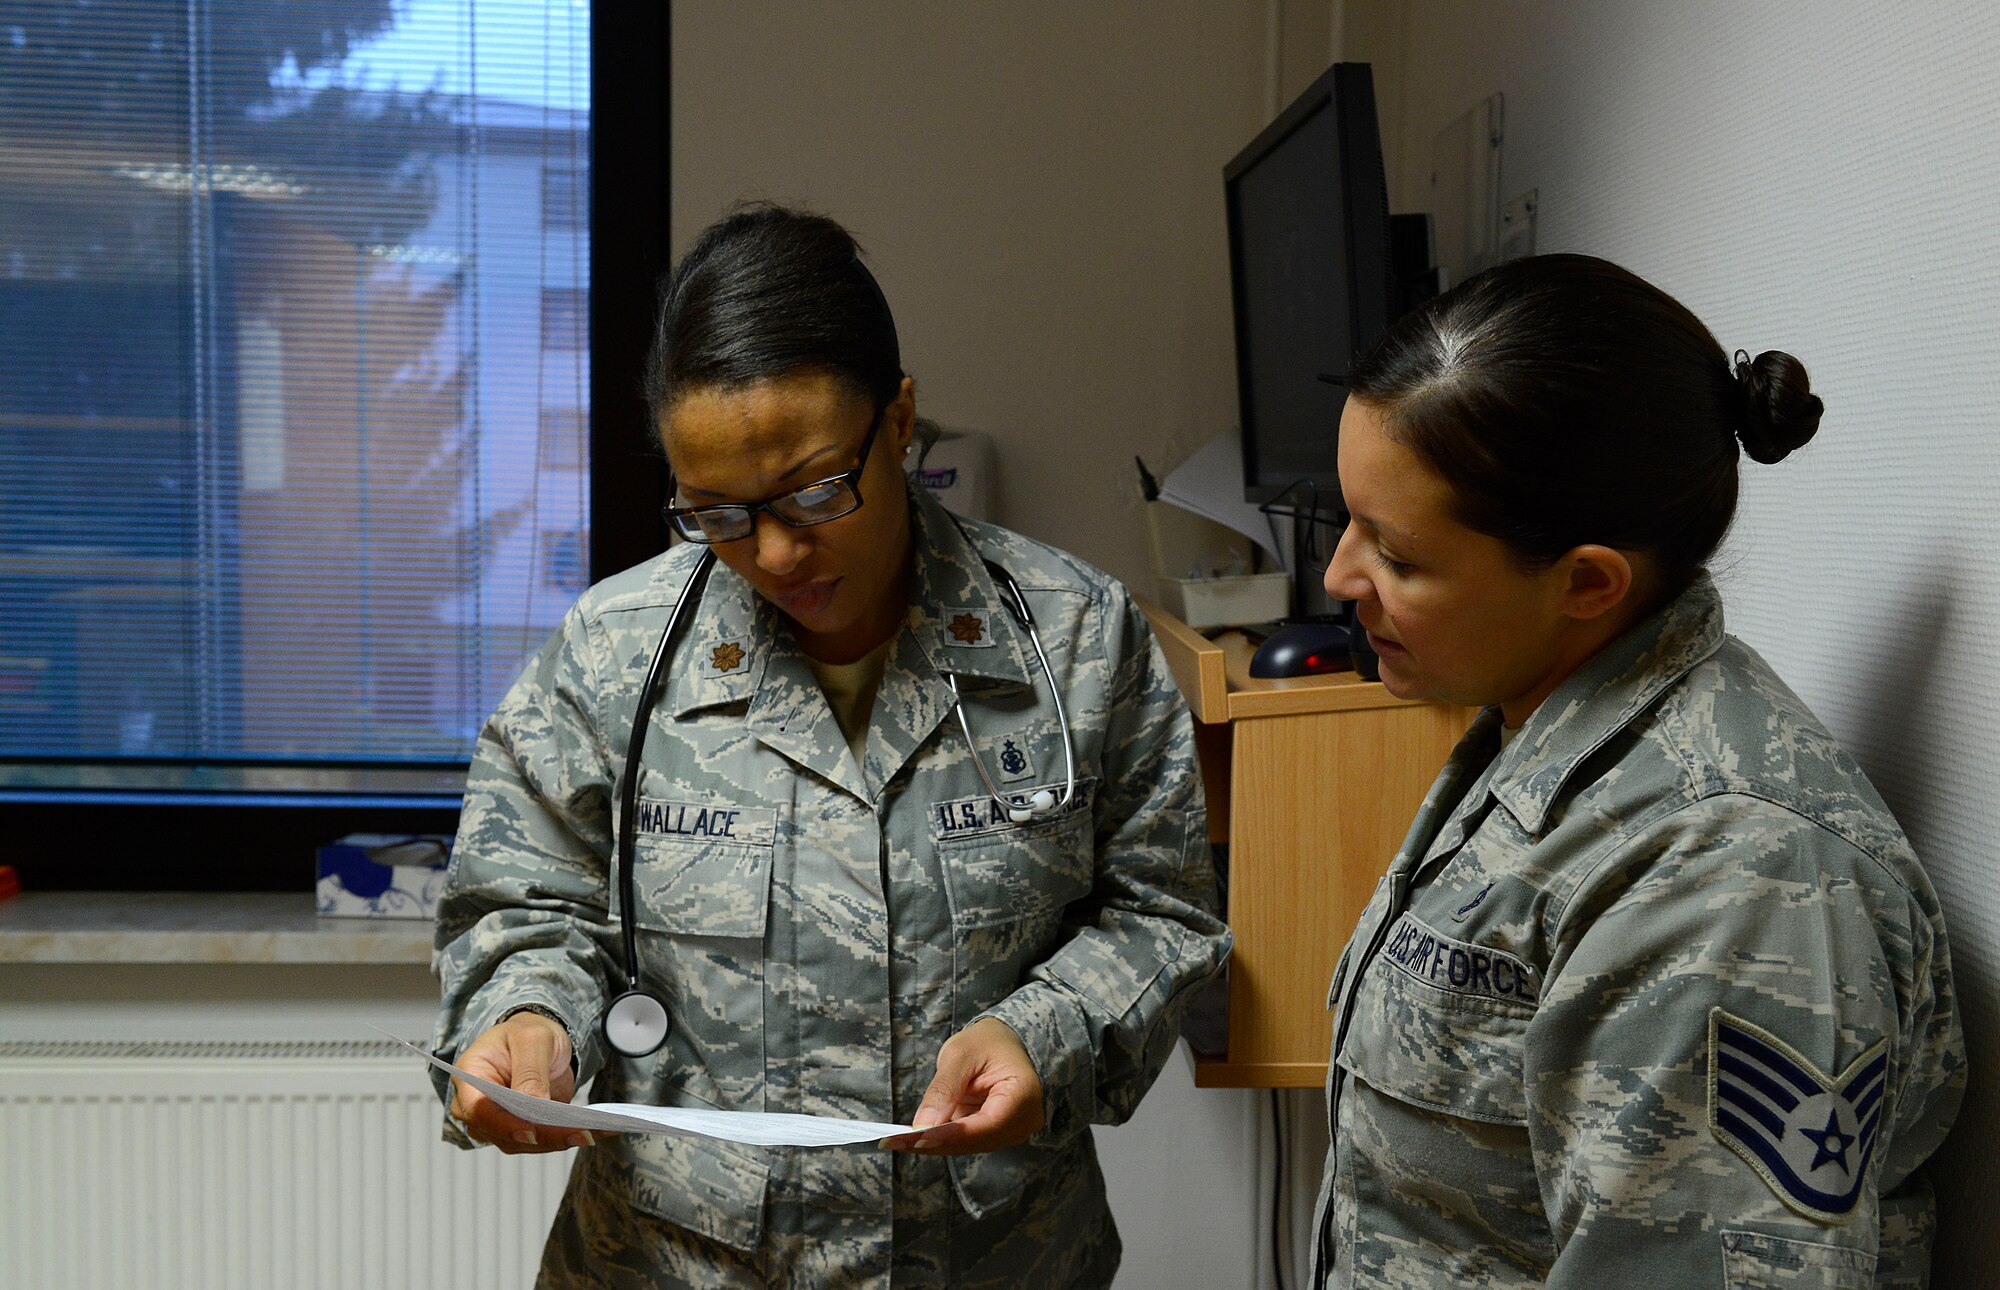 Staff Sgt. Megan Cotter, 86th Medical Operations Squadron NCO in charge of ambulance services, tells Maj. Courtney Wallace, Family Health Clinic clinical nurse, about the symptoms of a patient being seen at the Cold and Allergy Clinic at Ramstein Air Base, Germany, Nov. 4, 2015. The clinic was opened to help relieve the increased volume of patients brought to the Family Health Clinic suffering from symptoms associated with the winter and spring seasons. (U.S. Air Force photo/Airman 1st Class Tryphena Mayhugh)